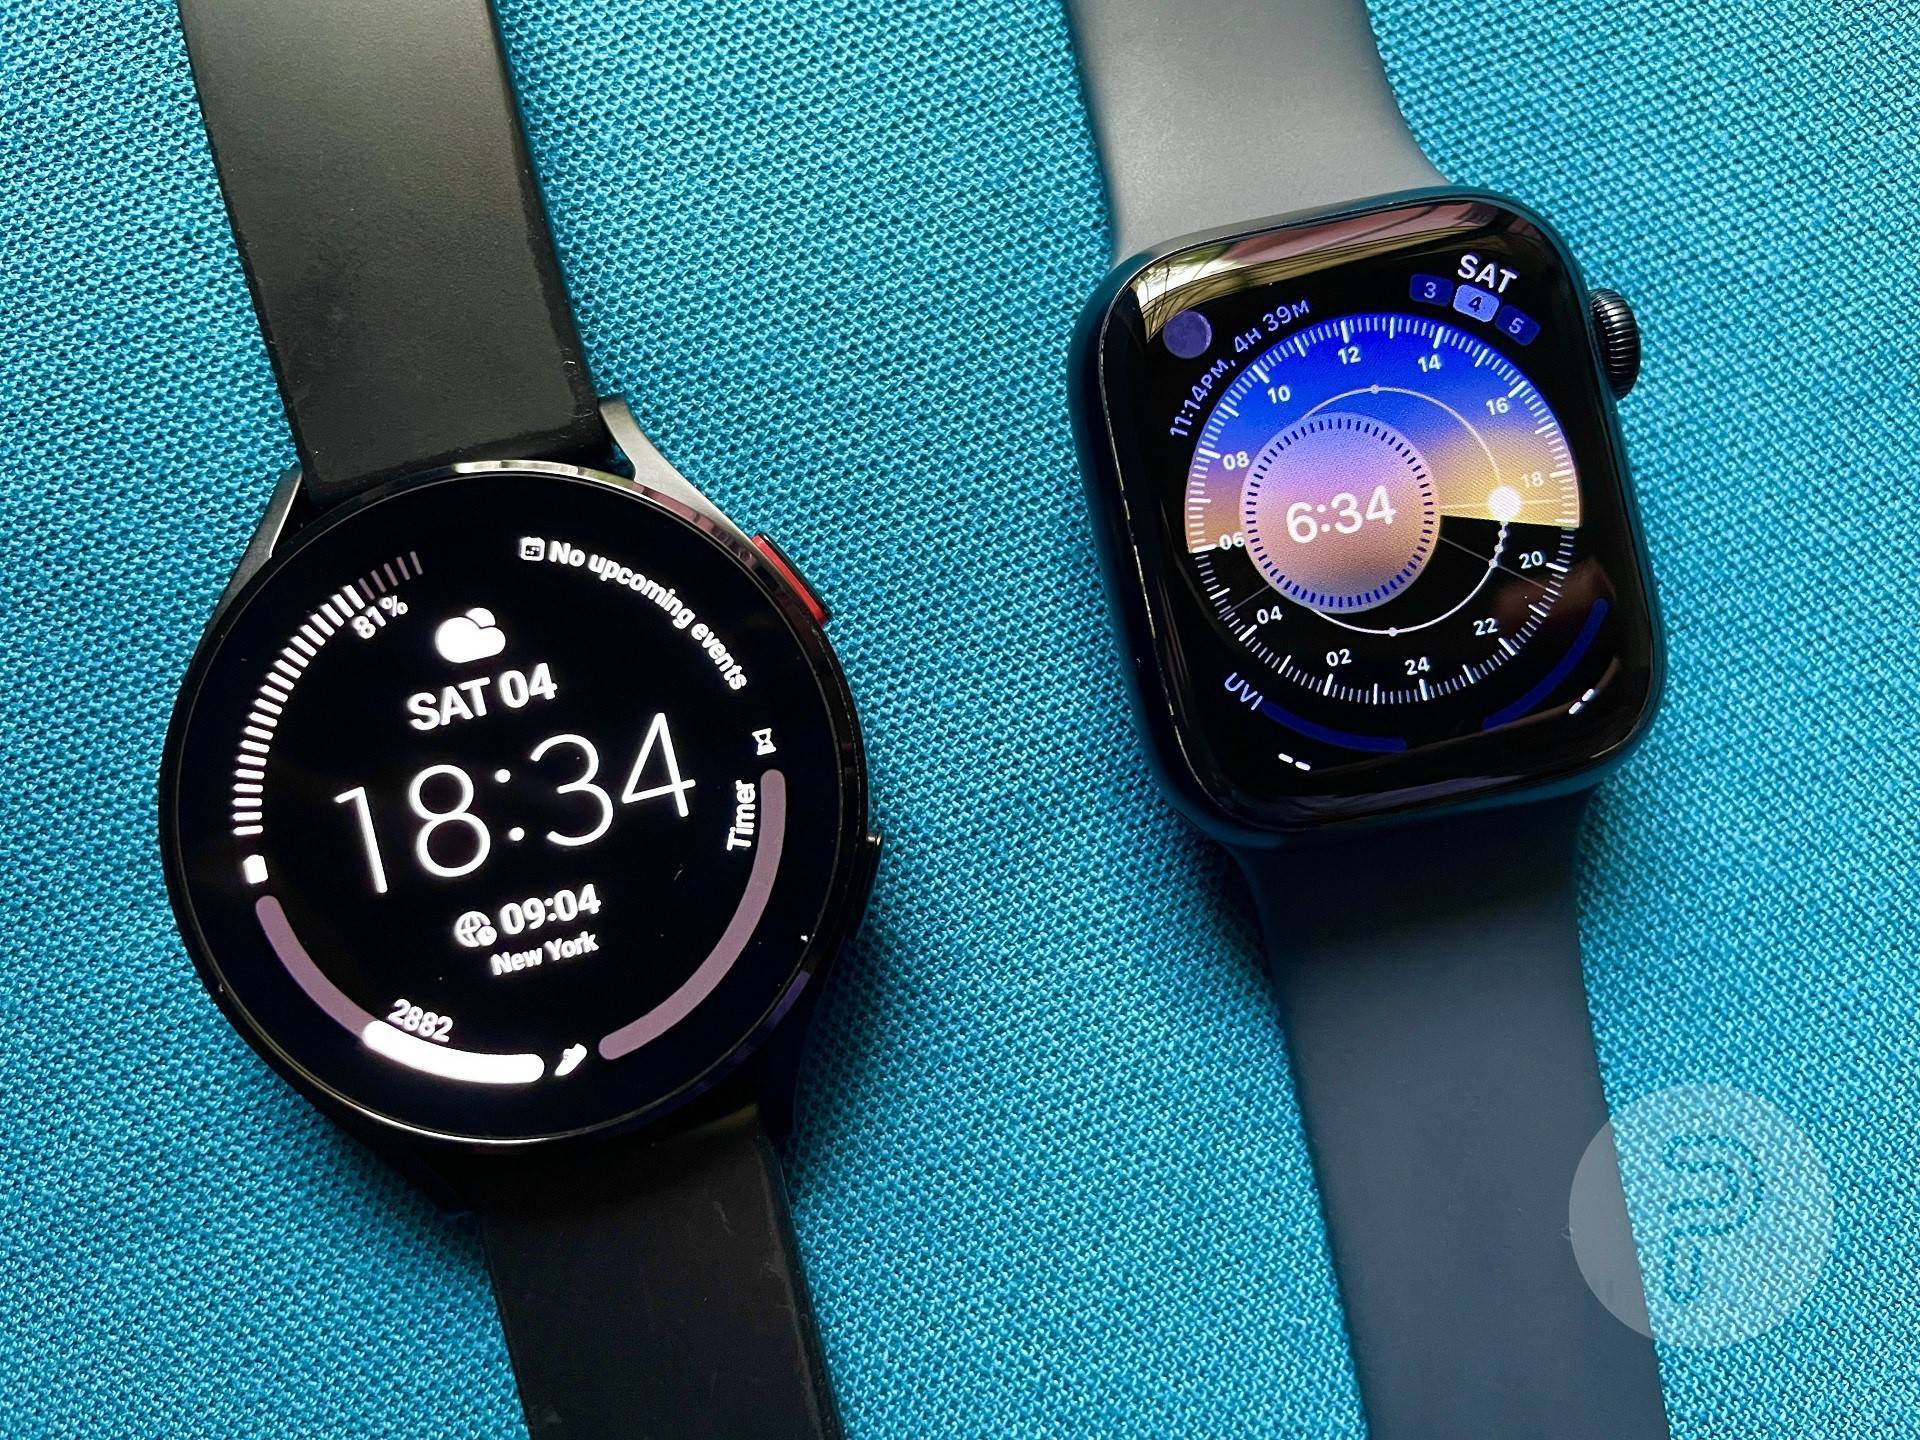 Galaxy Watch 4 and Apple Watch Series 7 placed on a cloth surface